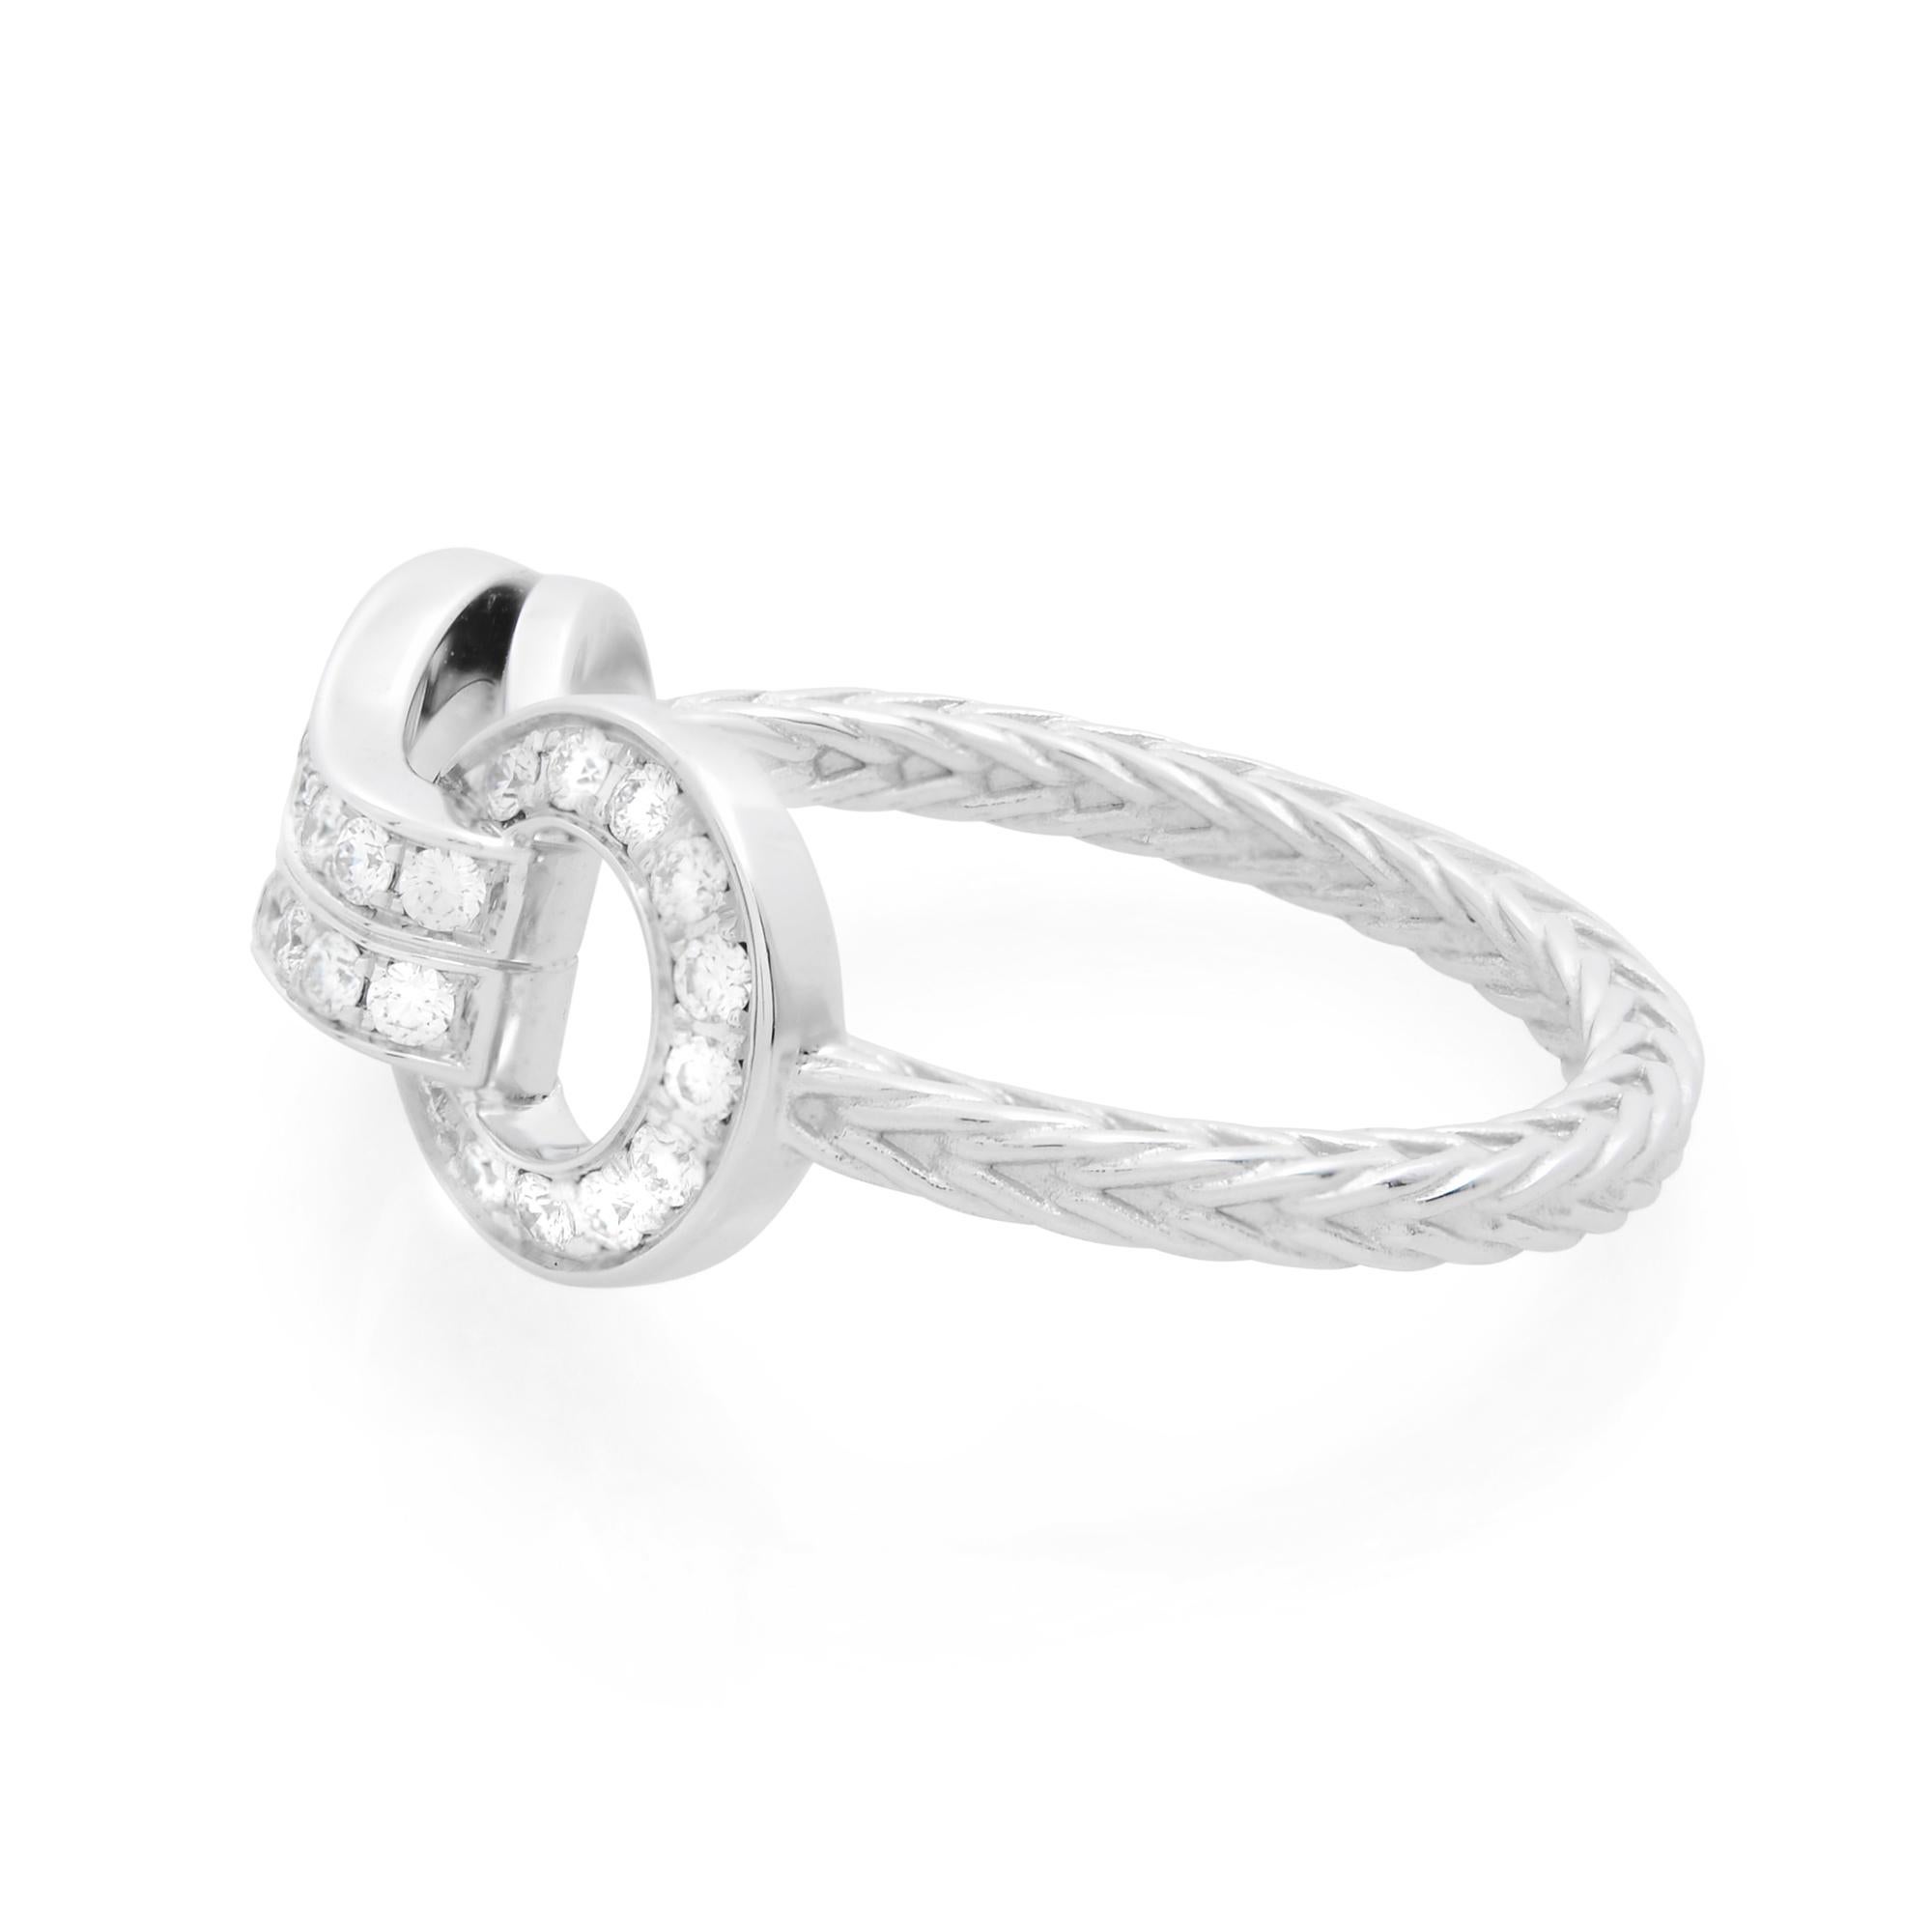 Cartier's 18K white gold diamond ring from Agrafe collection. Features 32 round cut diamonds. Total diamond carat weight: 0.23. Diamond color grade: colorless. Diamond clarity: very very slightly included. High polished metal. Hallmarked. Ring size